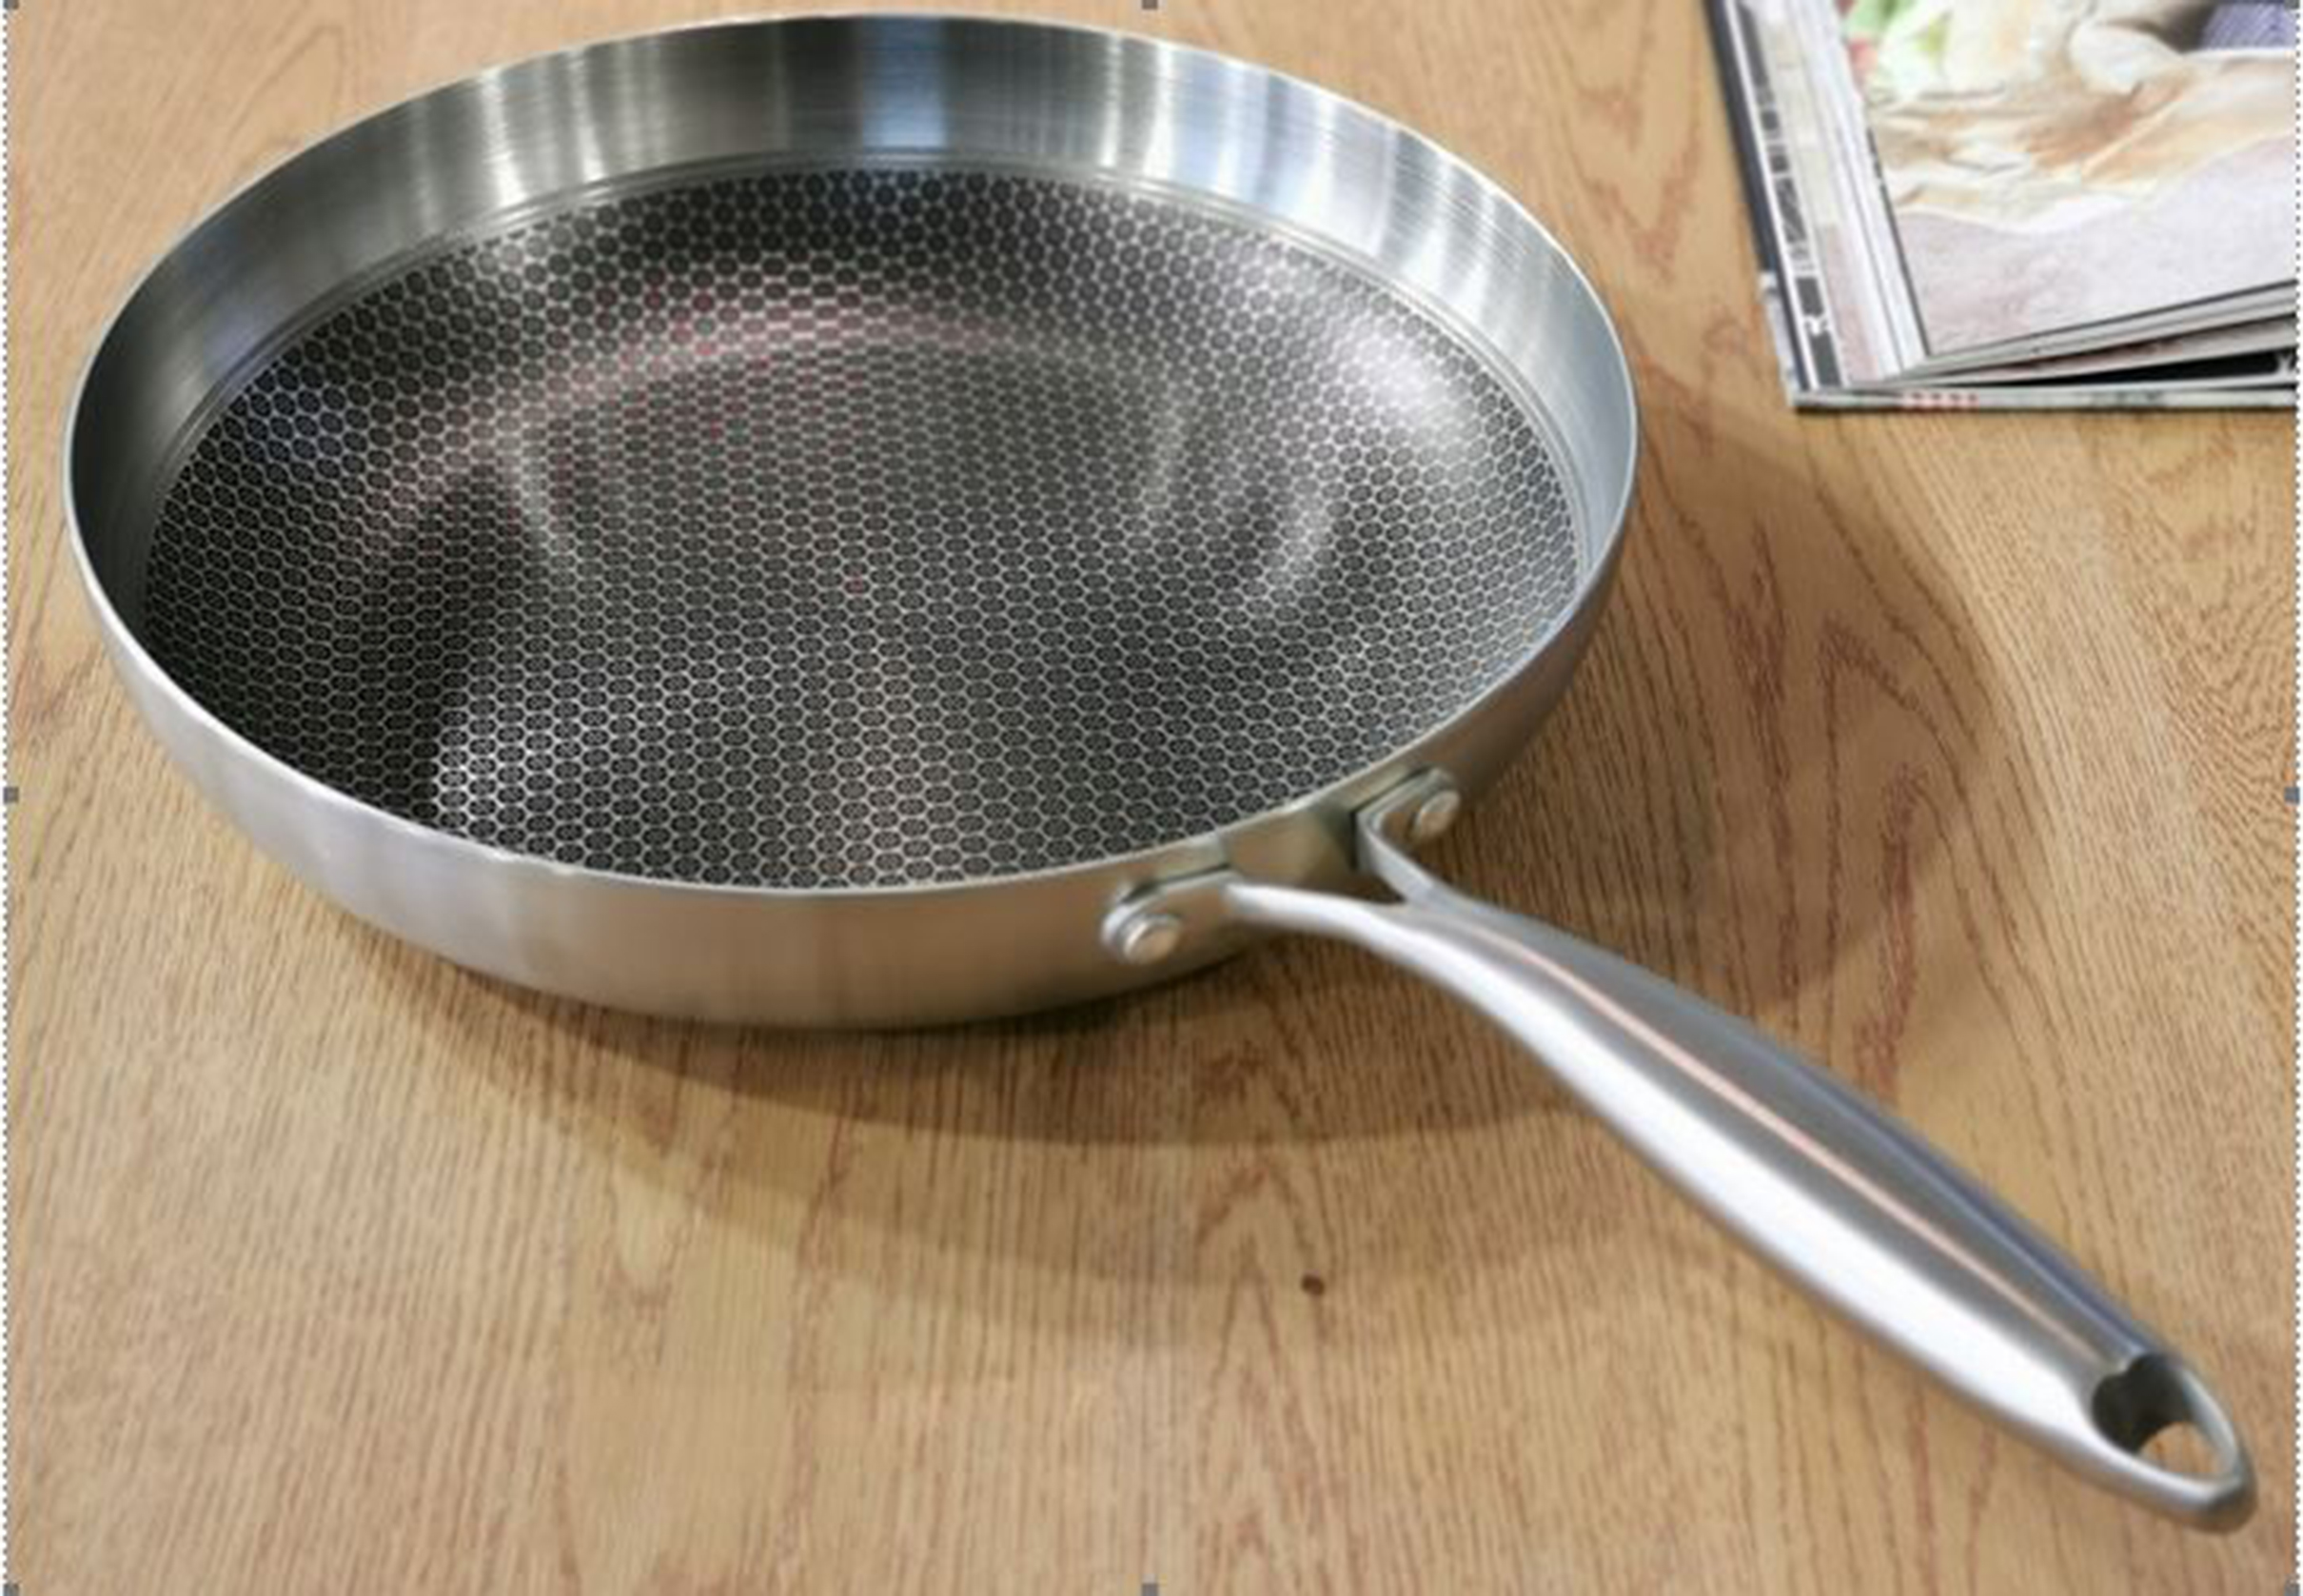 Frying Pan with non stick coating